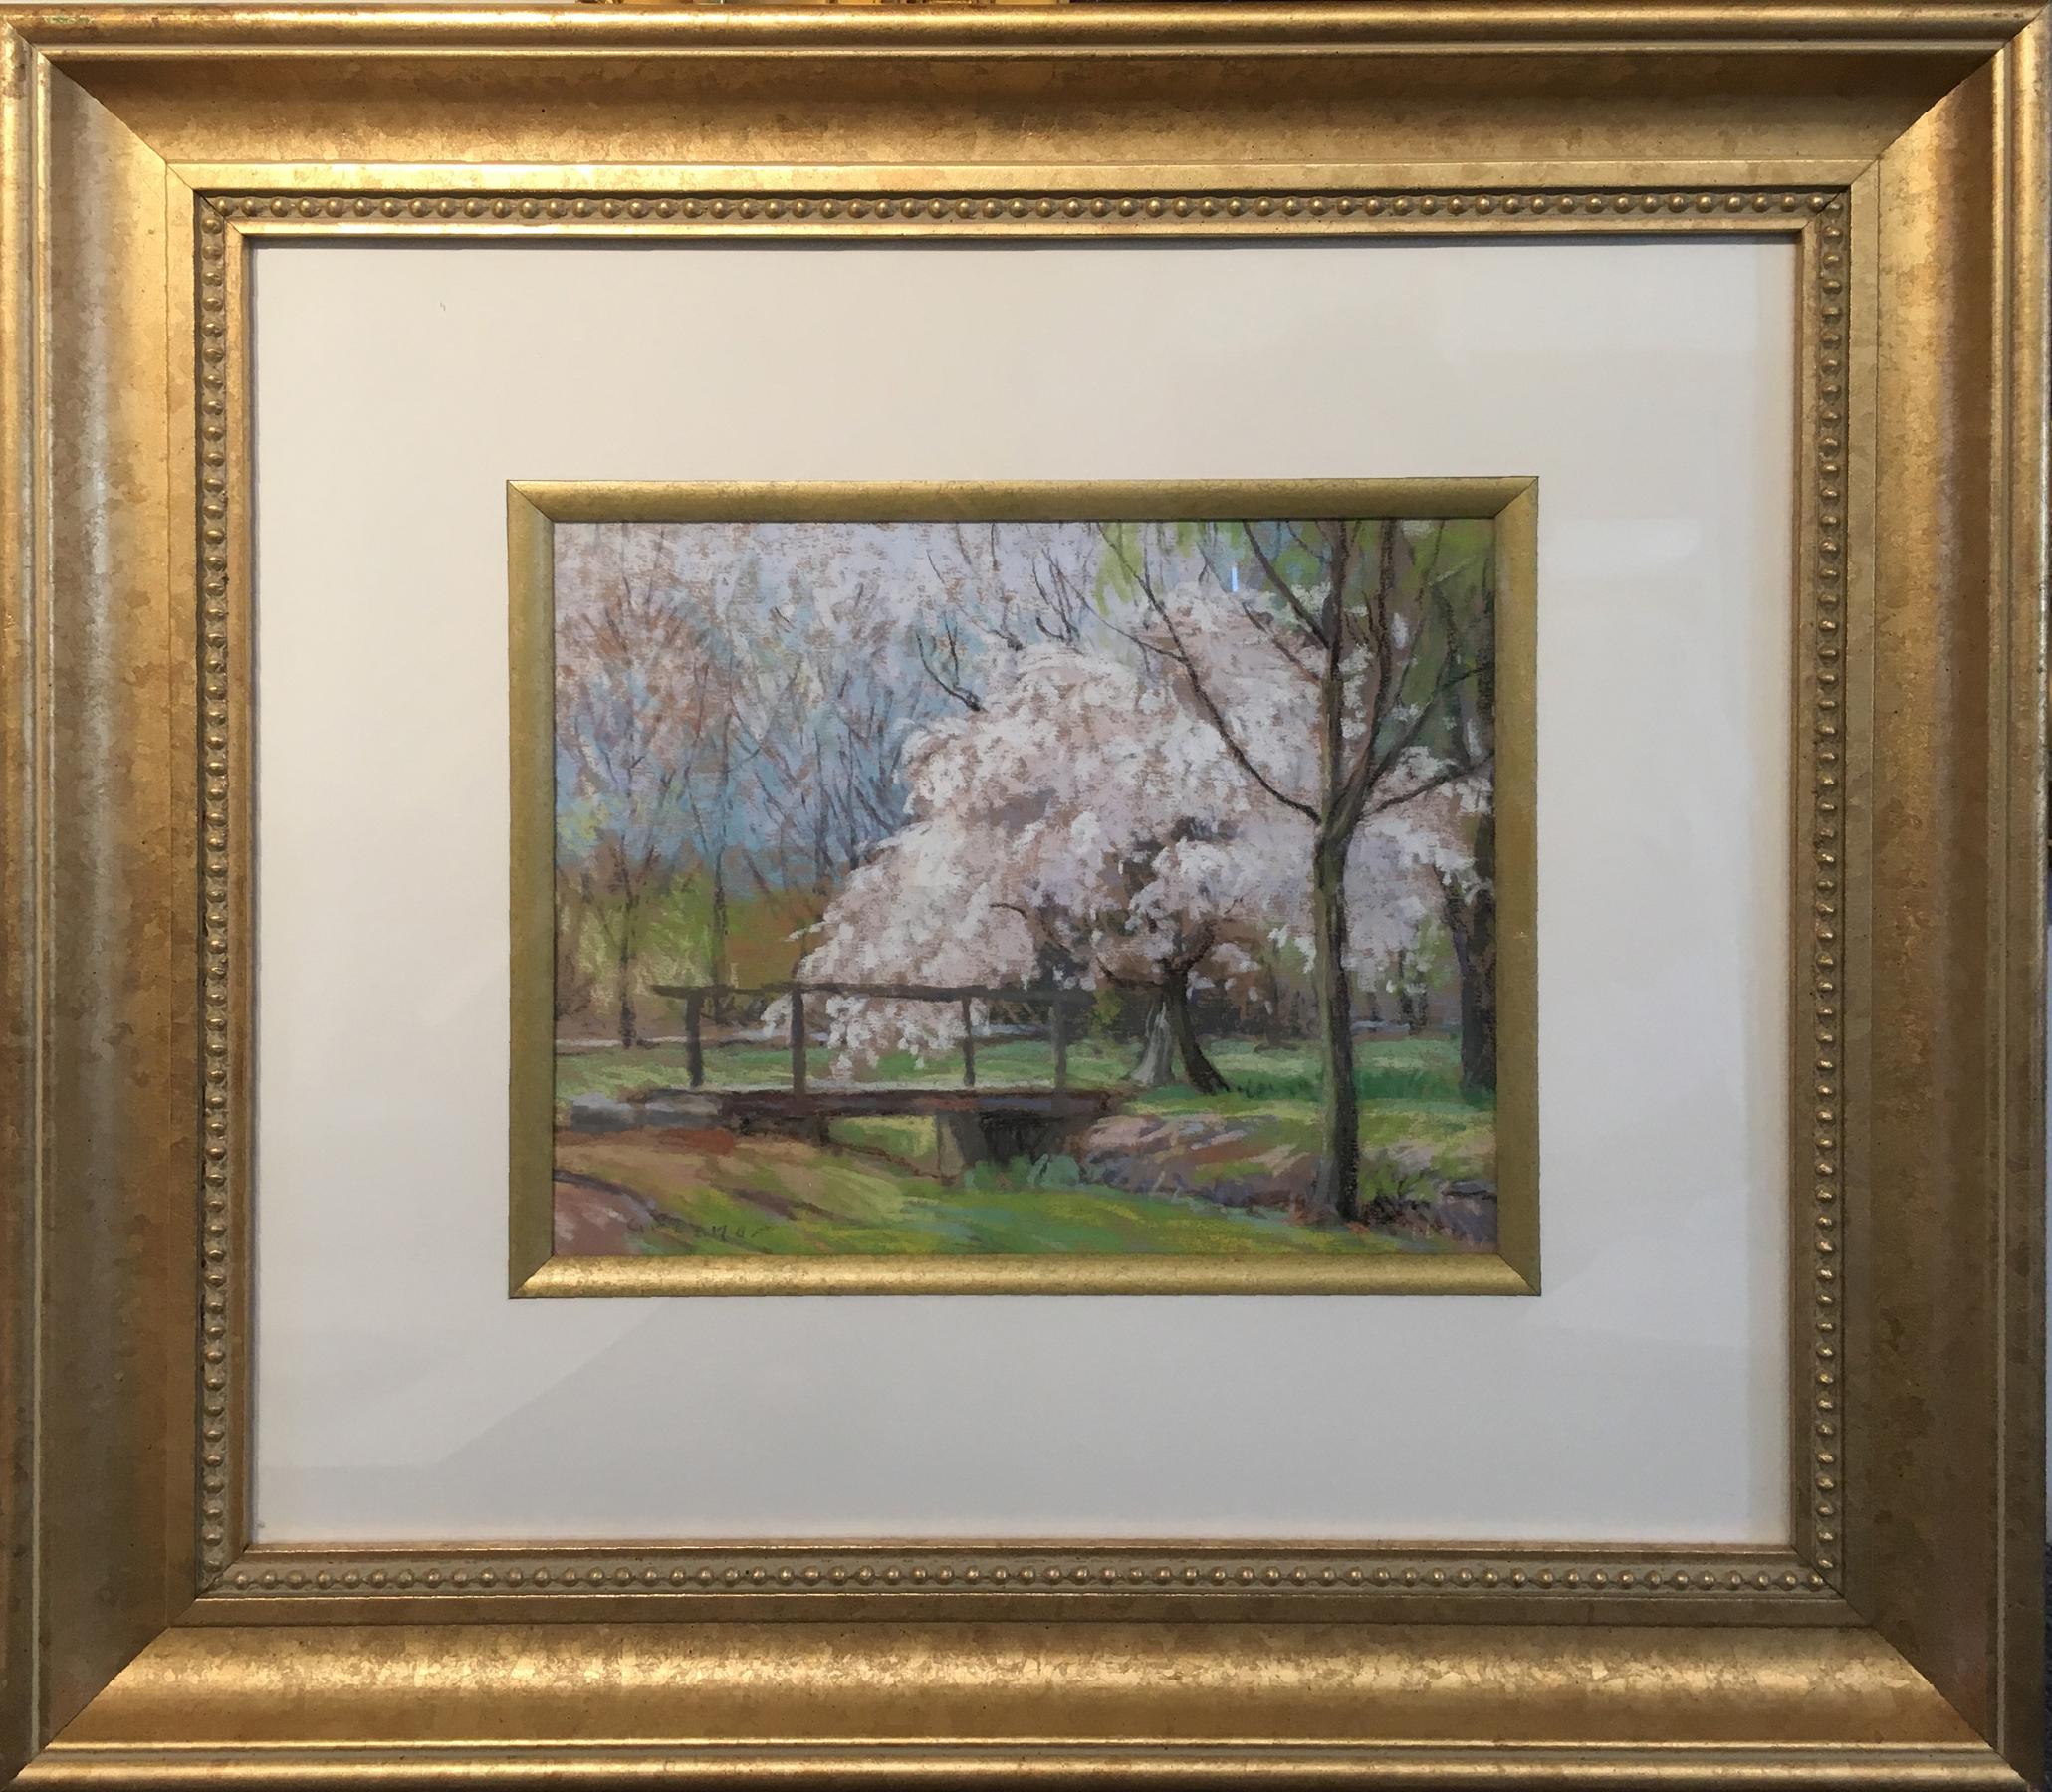 "Bridge with Blooming Tree, New Hope" by Albert Van Nesse Greene is an 8.5" x 10.5" pastel on paper, it is signed on the lower left "Greene". The artwork is matted and framed, it is in excellent and original condition. The painting came from a